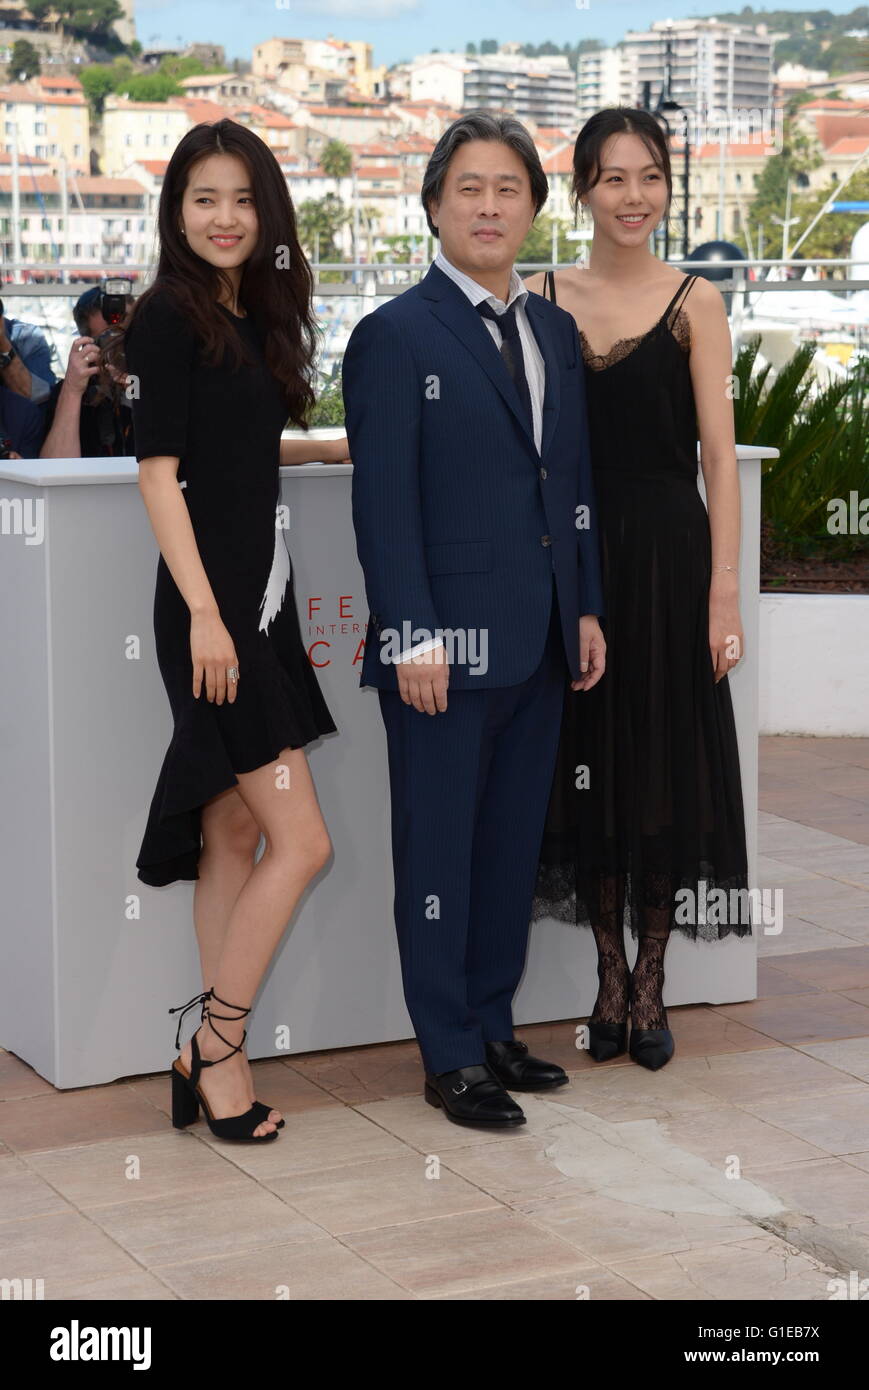 Cannes, France. 11th May, 2016. CANNES, FRANCE - MAY 14: Actress Kim Tae-Ri, diretor Park Chan-Wook and actress Kim Min-Hee attend the 'Mademoiselle (Agassi, The Handmaiden)' - Photocall at the annual 69th Cannes Film Festival at Palais des Festivals on May 14, 2016 in Cannes, France. © Frederick Injimbert/ZUMA Wire/Alamy Live News Stock Photo